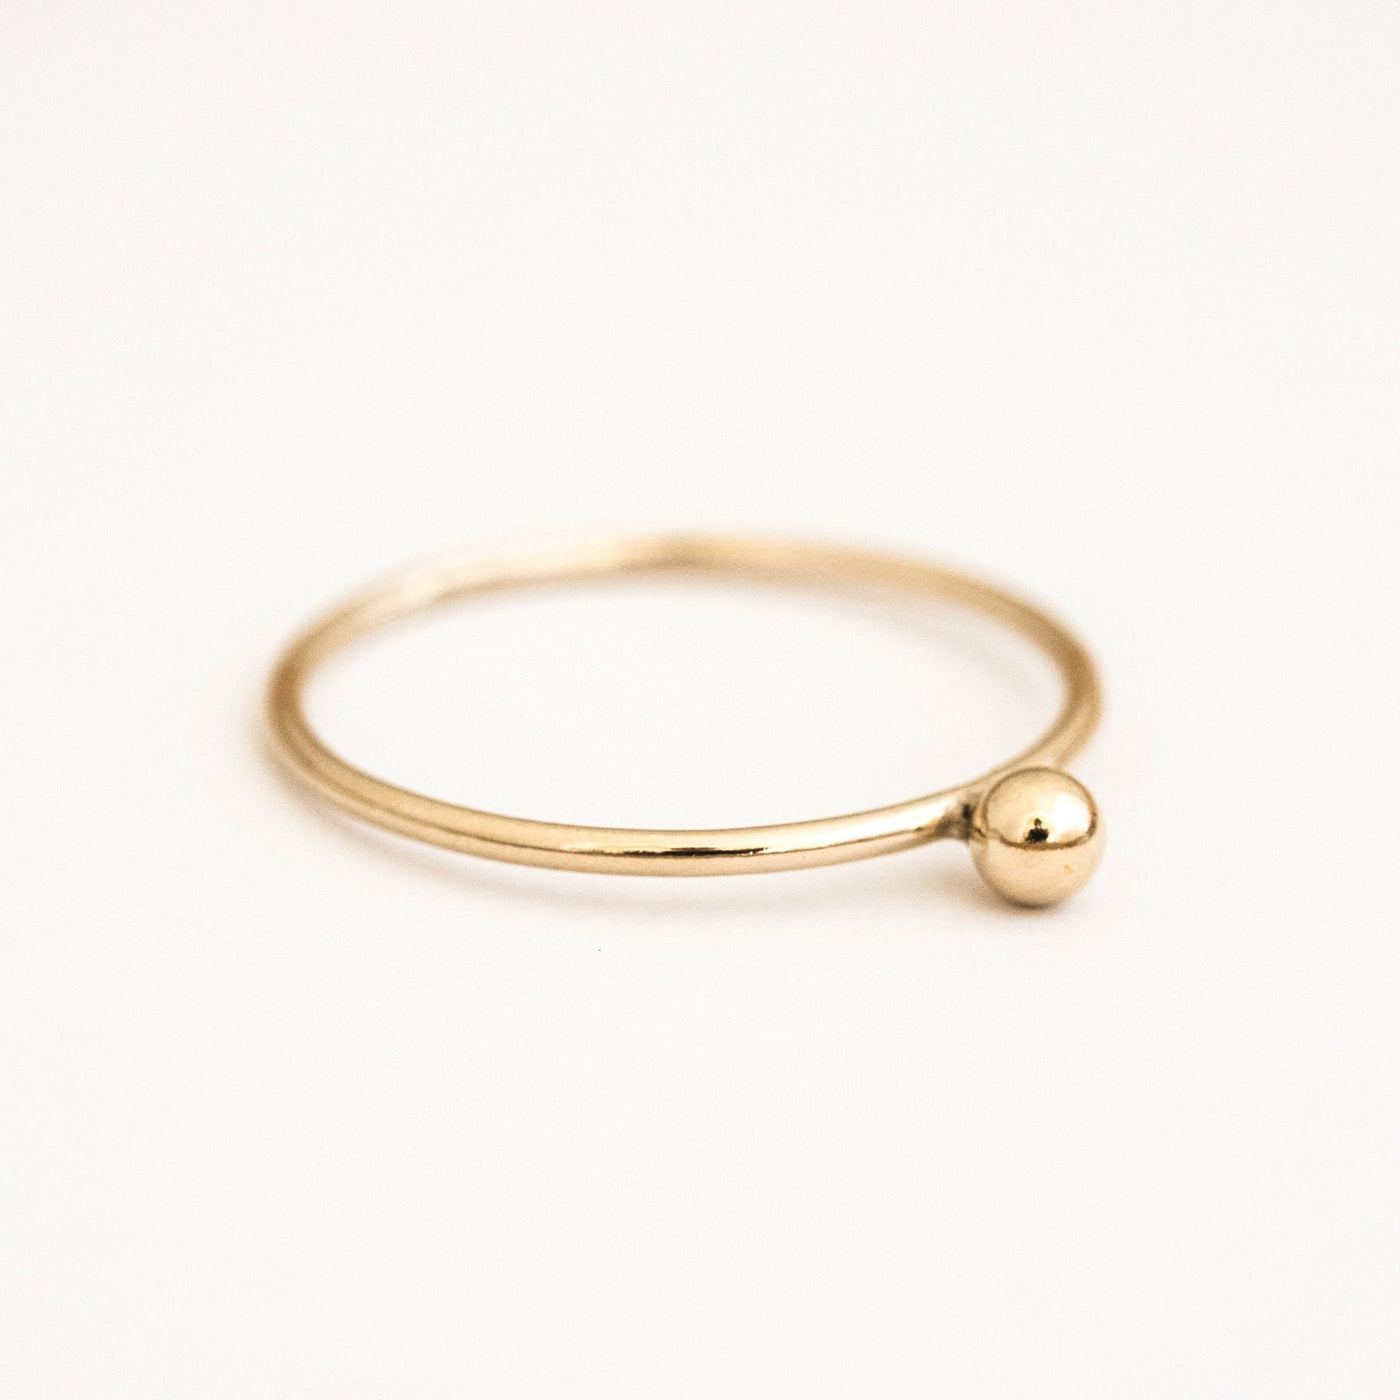 Tiny Ball Ring by Simple & Dainty Jewelry